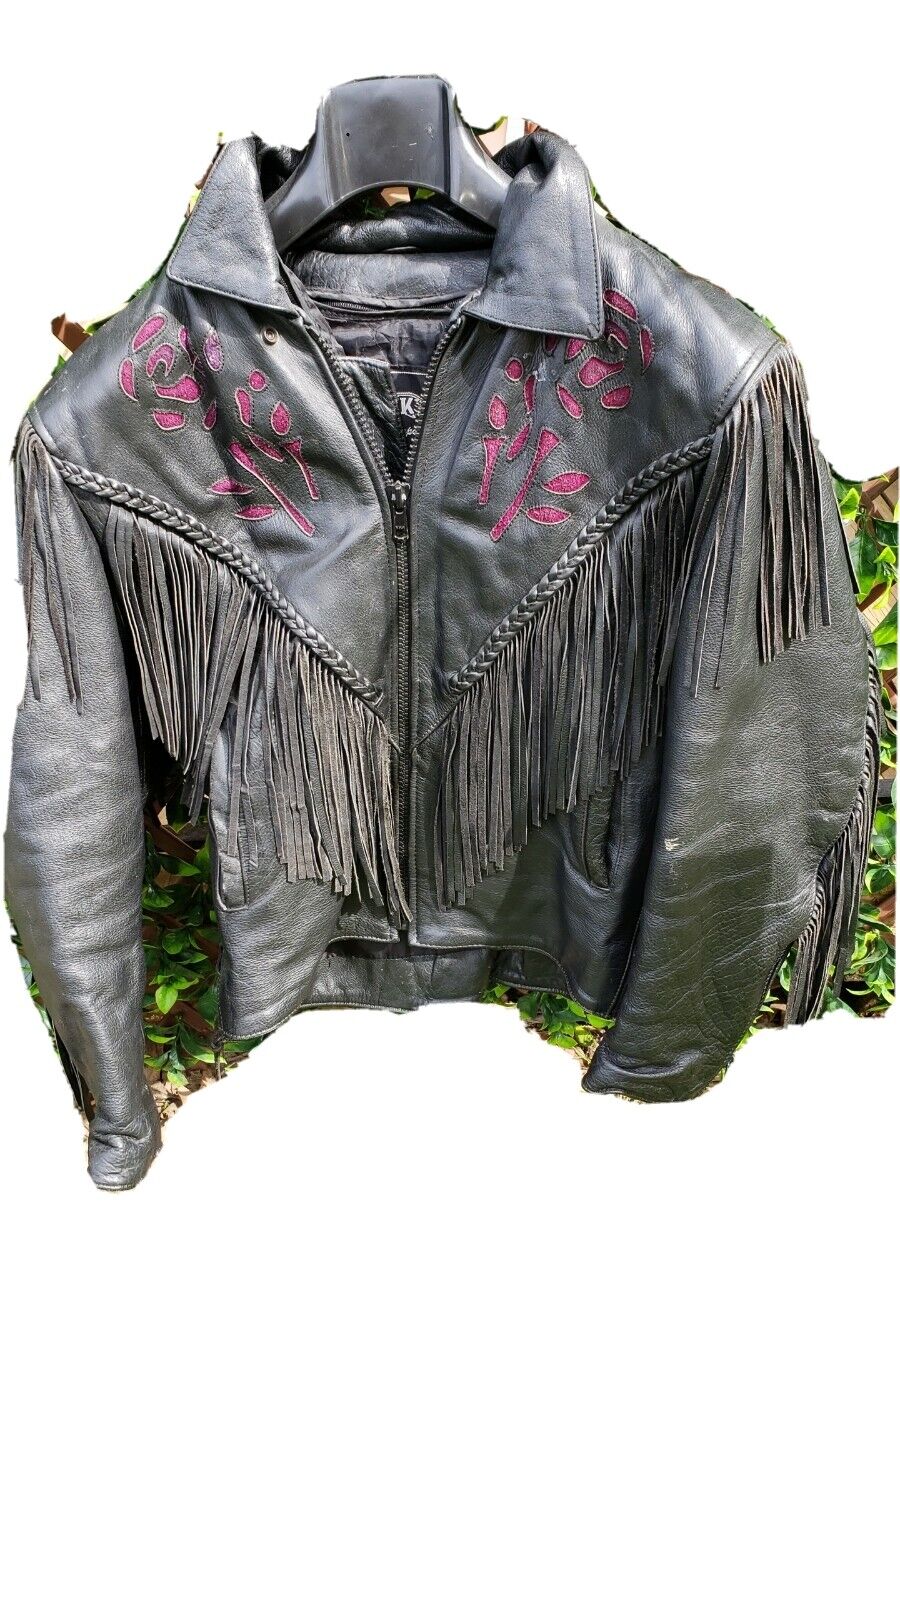 Womens Leather Jacket & Matching Chaps Size M. Jacket has Zip out liner. 